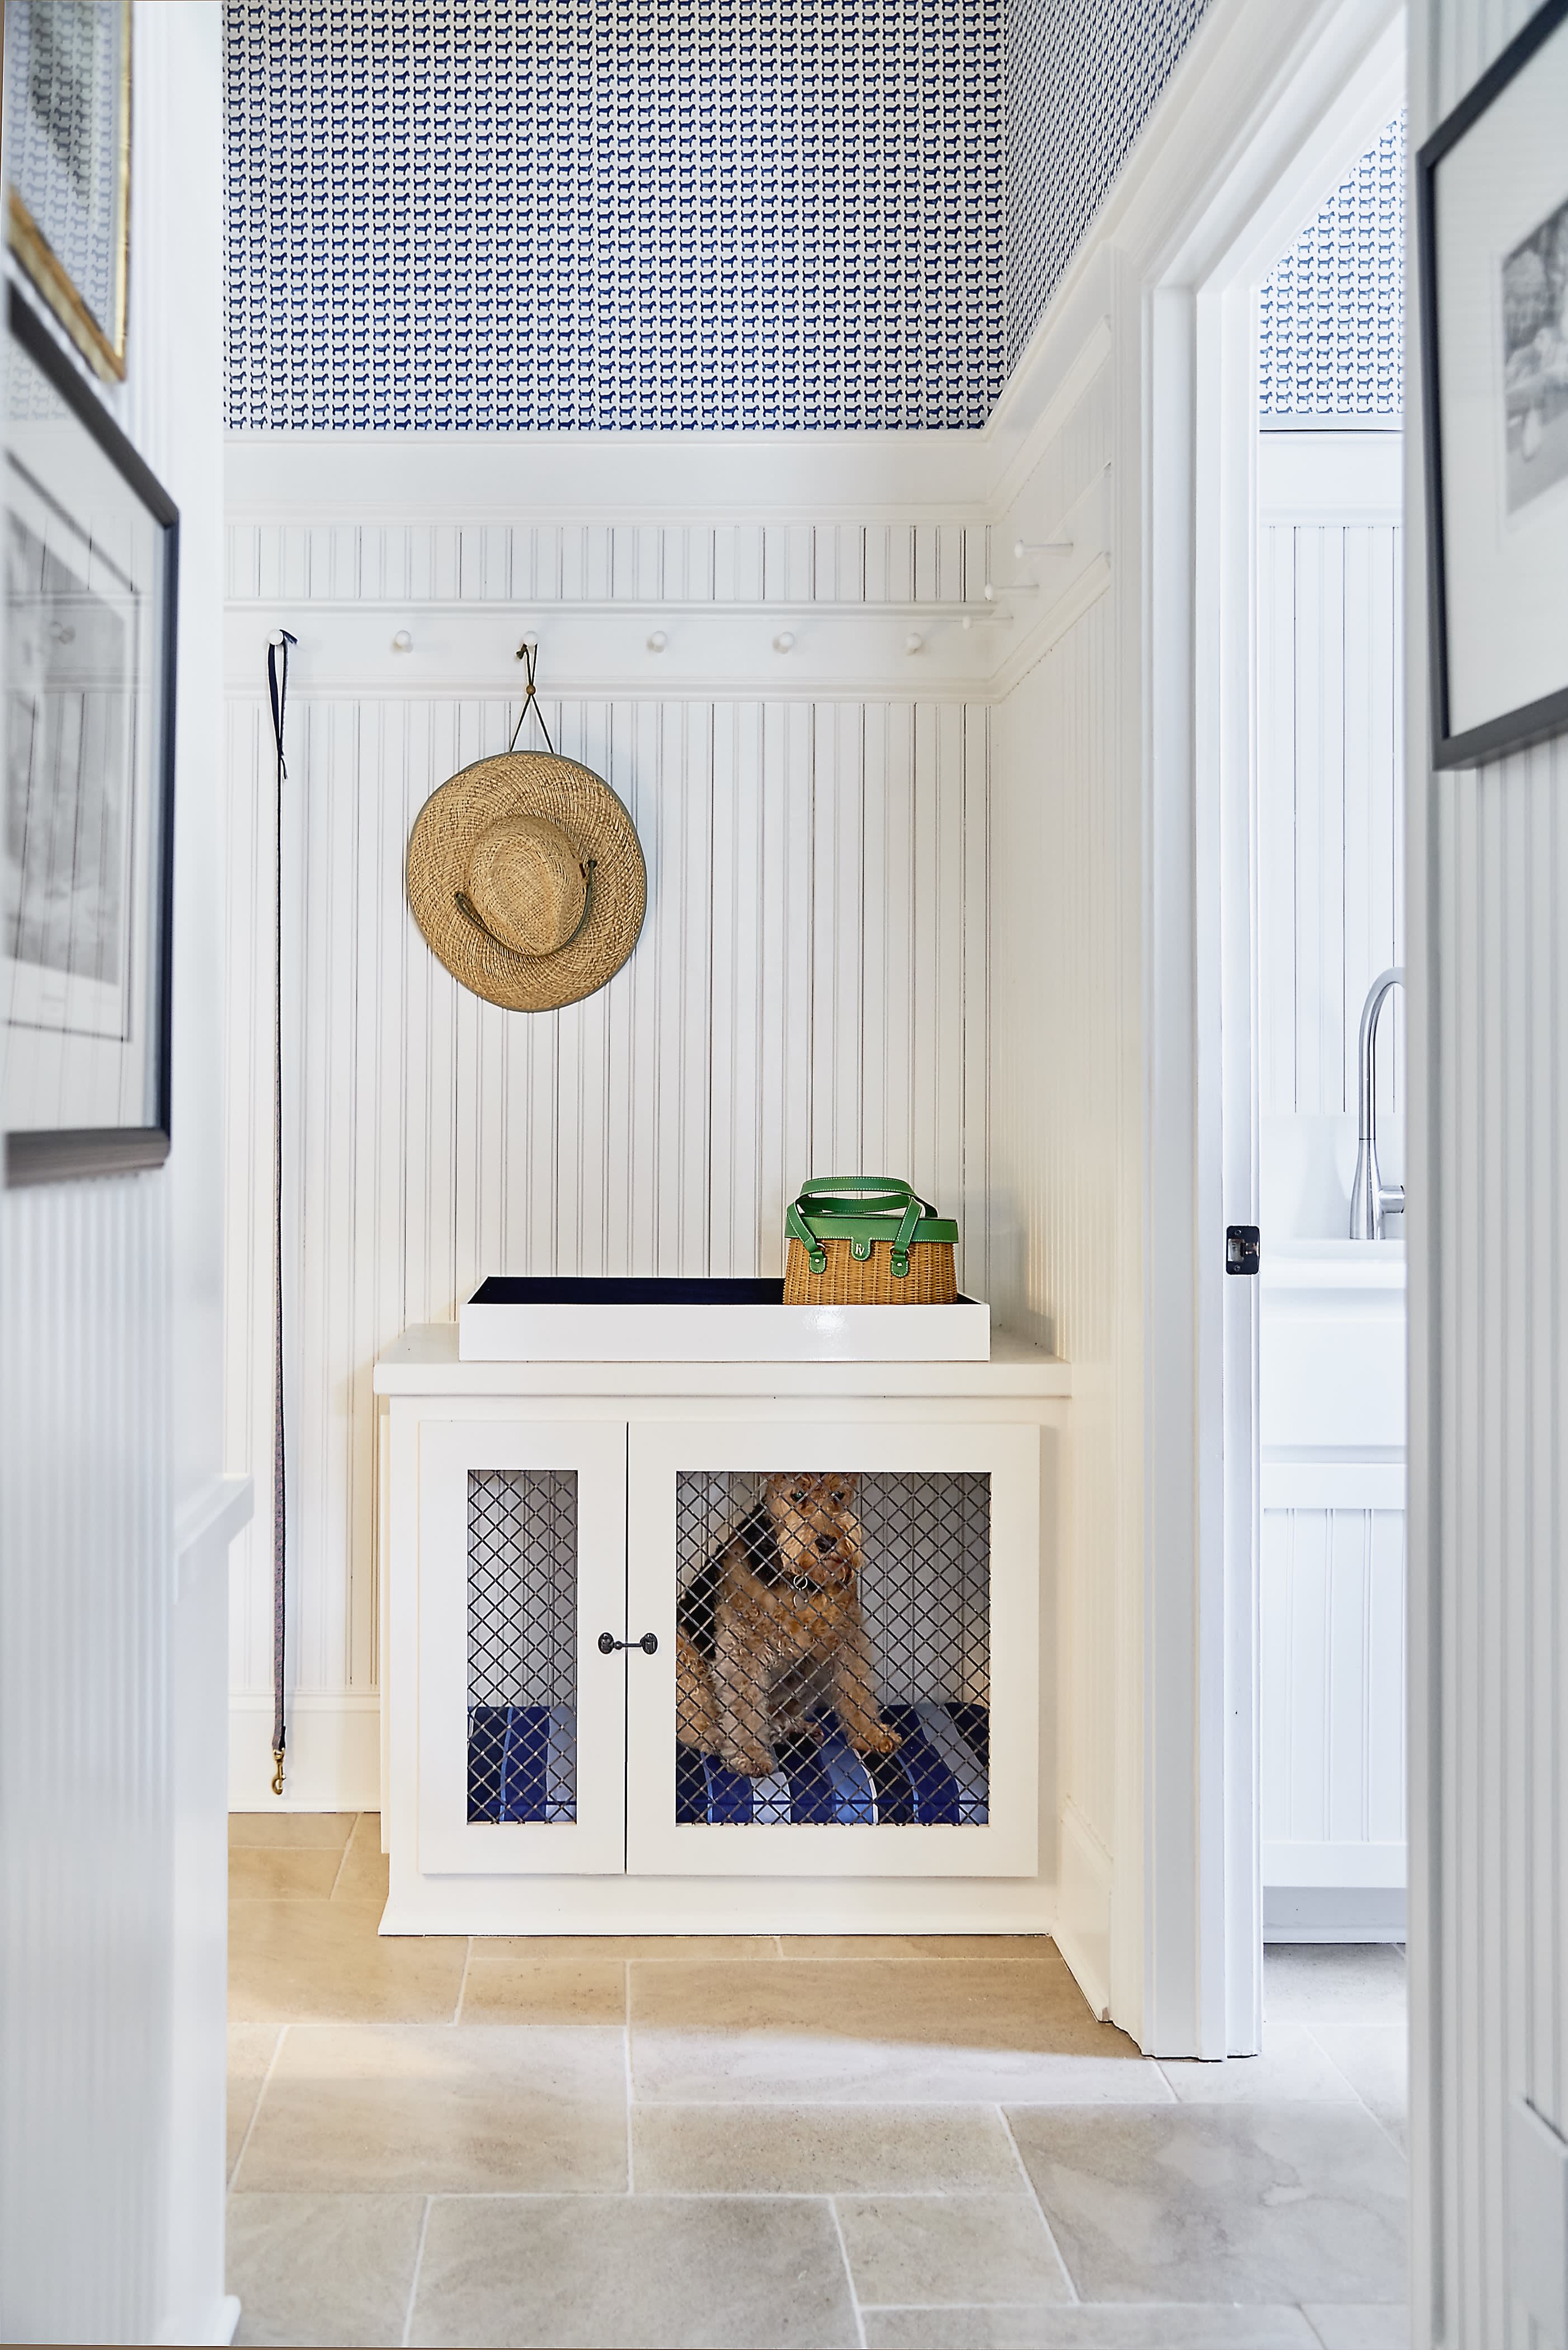 https://cdn.apartmenttherapy.info/image/upload/v1605544714/at/style/2020-11/Decorating%20w%20Pets/1._Photo_by_Dustin_Peck_courtesy_of_The_Warehouse_Interiors.jpg